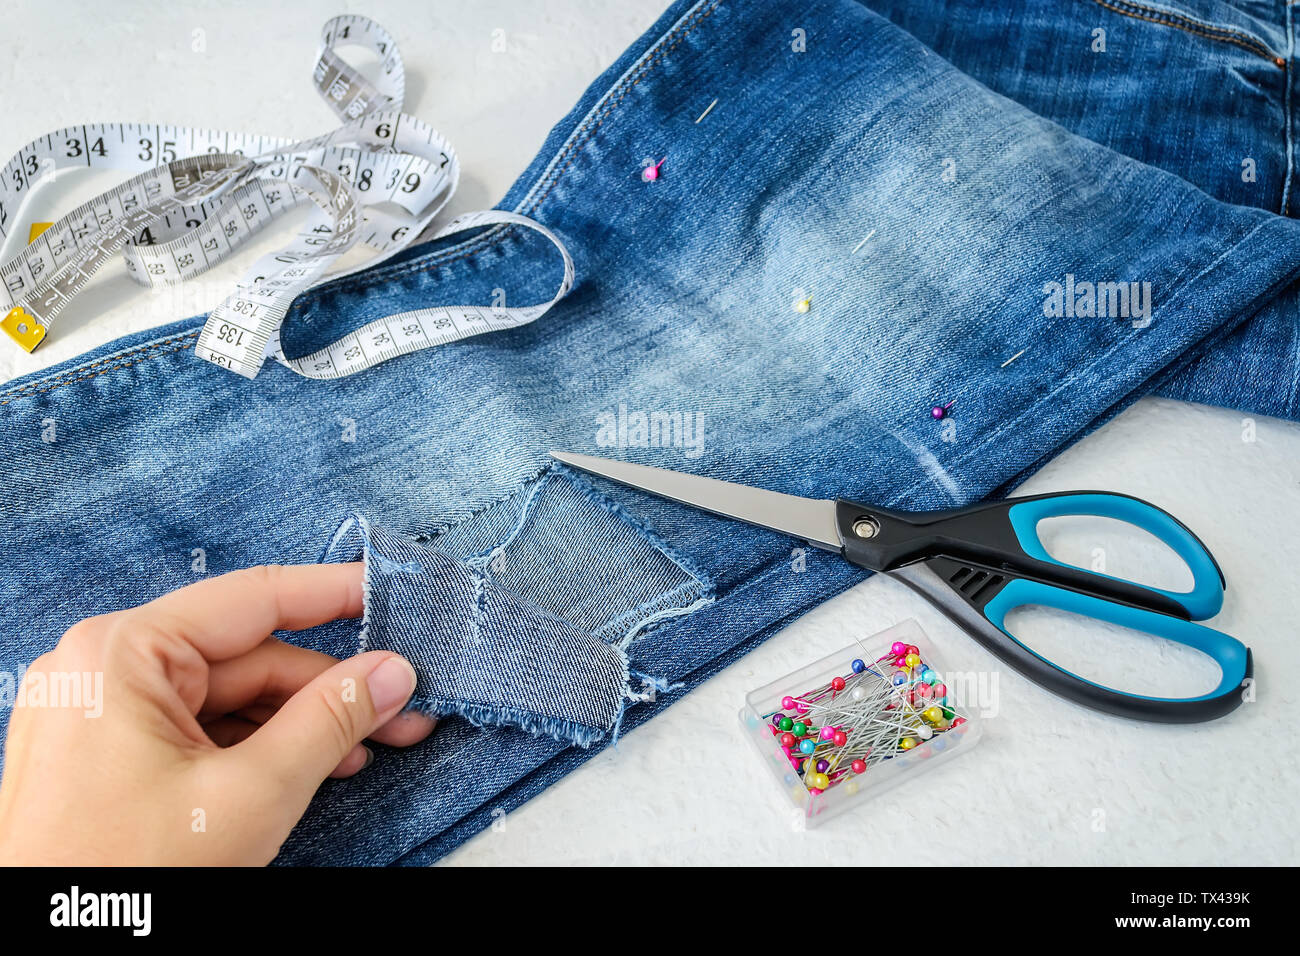 Woman hand shows a large hole on pant leg of a blue jeans folded in half.  Jeans are prepared for cutting out for making denim shorts. With scissors,  p Stock Photo -